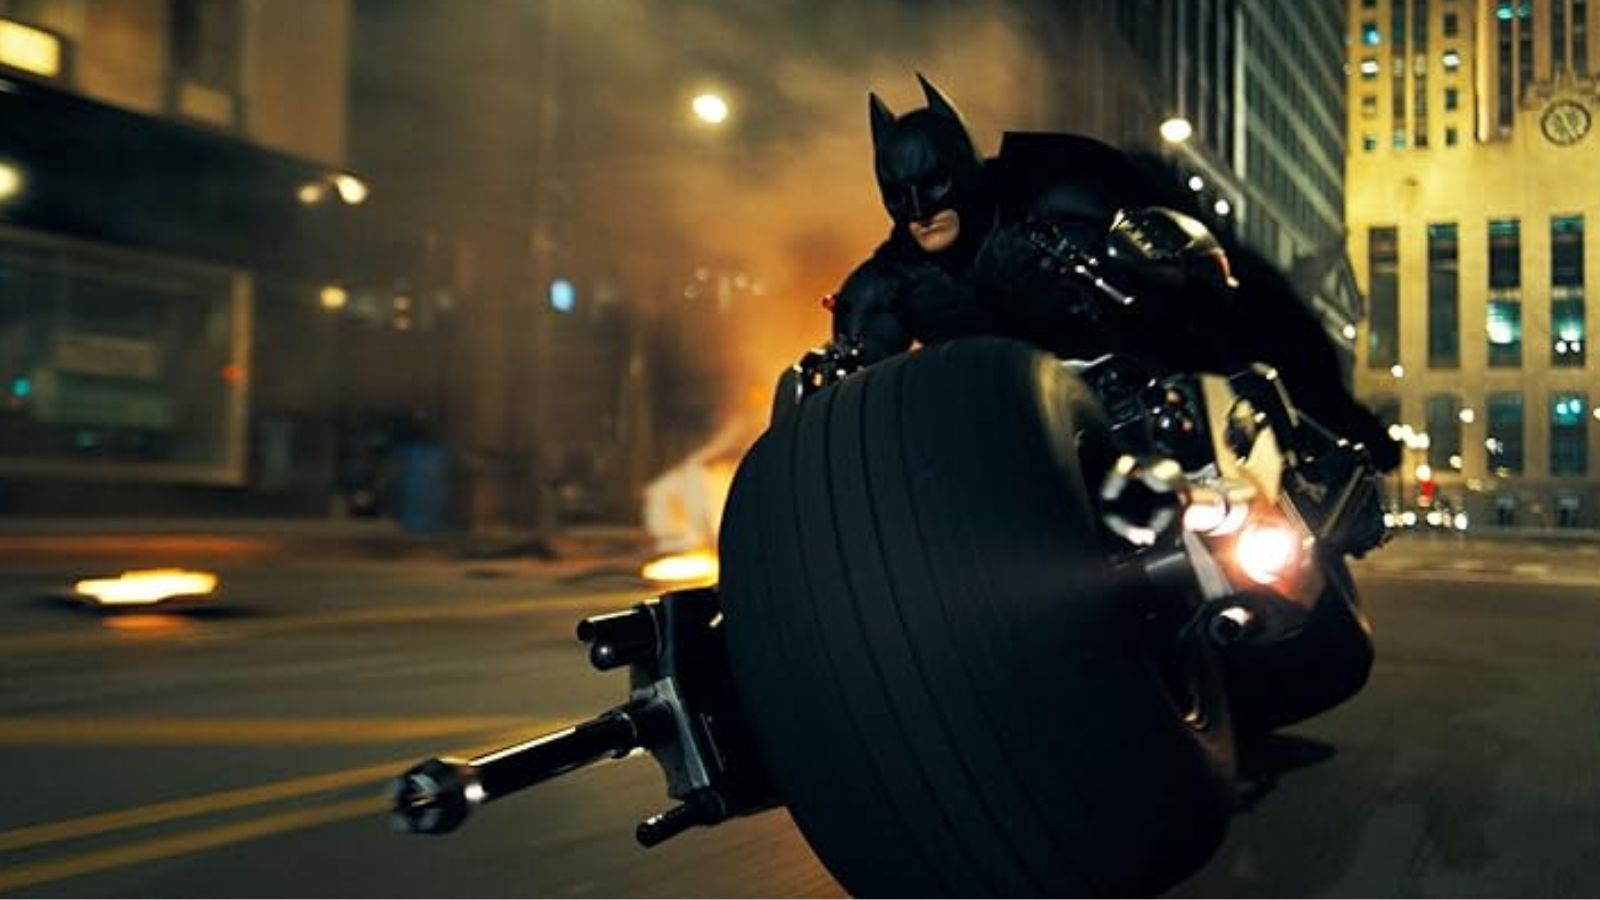 <span>Over the years, Batman movies have provided some</span><a class="editor-rtfLink" href="https://www.youtube.com/watch?v=0JdfIiCffao" rel="noopener"><span> genuinely iconic vehicles</span></a><span> for the titular character to use. These are typically fancy cars filled with gadgets, but Christopher Nolan shook things up by putting Christian Bale on a motorcycle. It was a crazy high-tech design that was sleek to look at, with the enormous wheels standing out.</span>